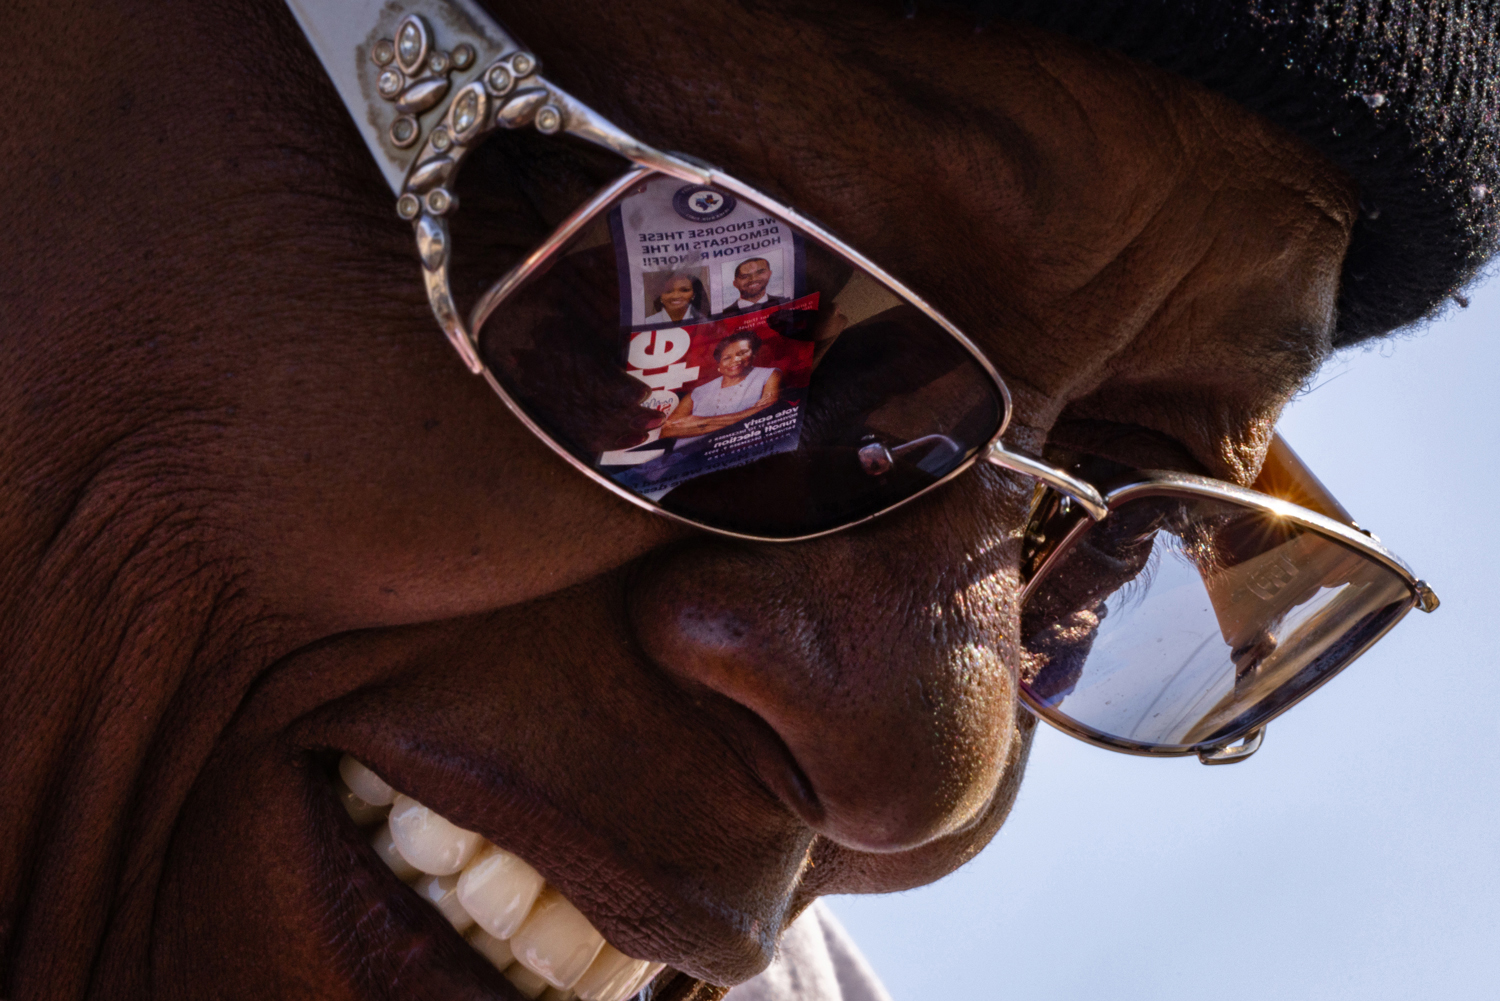 Congresswoman Sheila Jackson Lee’s photo is visible on the glasses of her supporter and campaign worker Fafaye Nickson during early voting of a Houston mayoral run-off race.